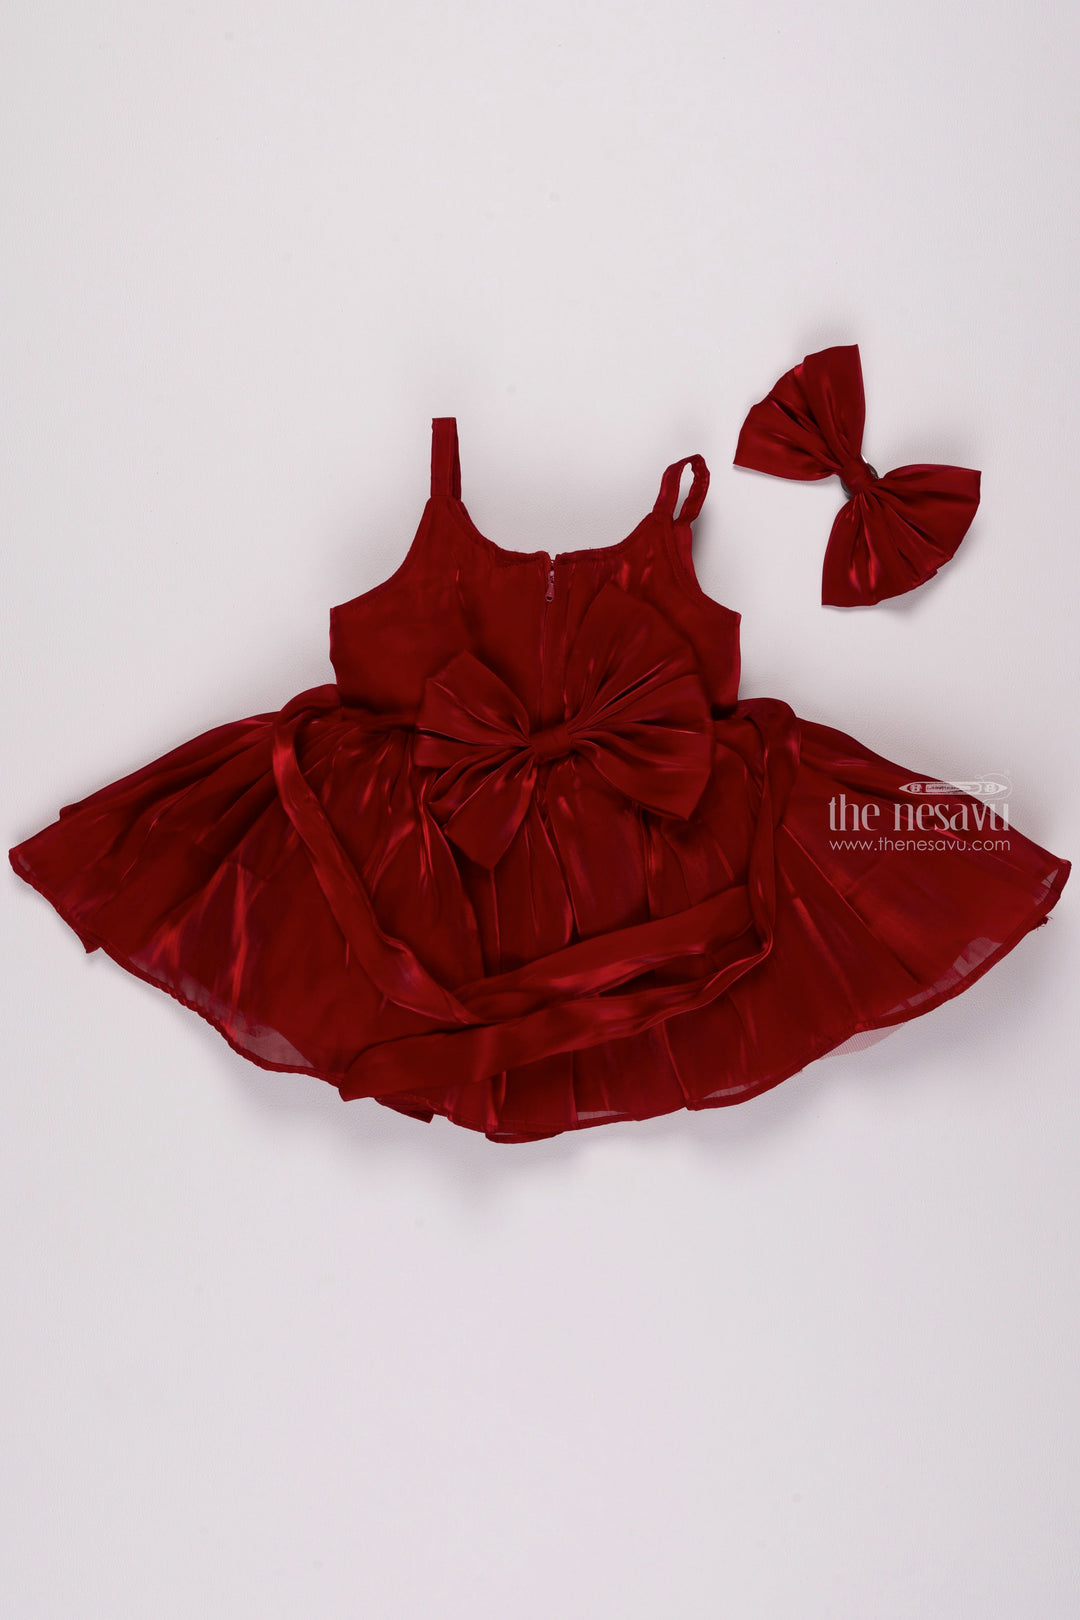 The Nesavu Girls Fancy Party Frock Crimson Blossom: Gorgeous Fabric Floral Applique on Red Organza Party Dress Nesavu Premium Organza Baby Dresses | Fancy Dresses for Little Girls | The Nesavu